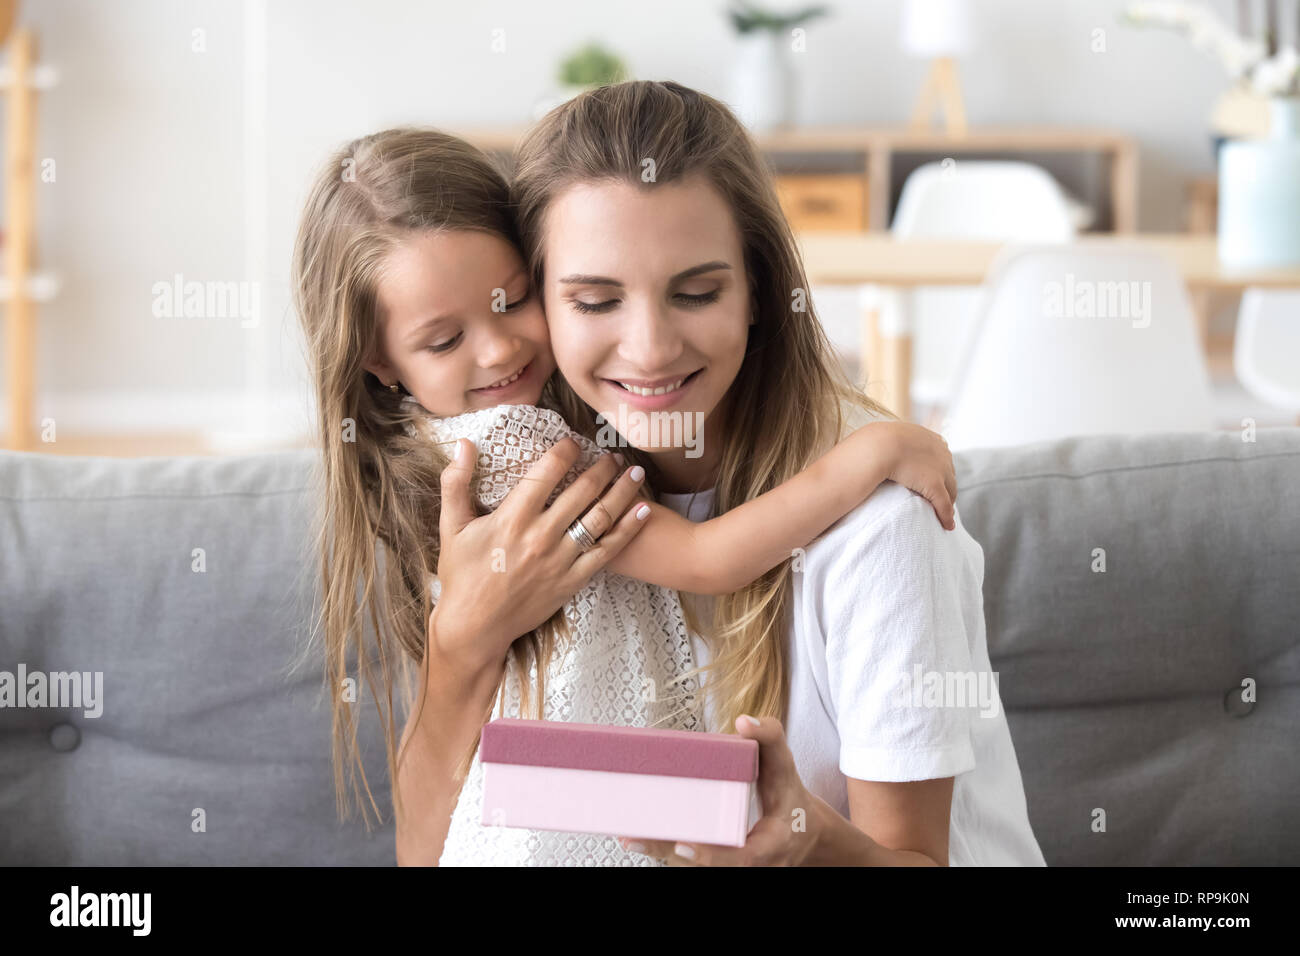 Loving happy mother embracing, thanking little daughter for present Stock Photo